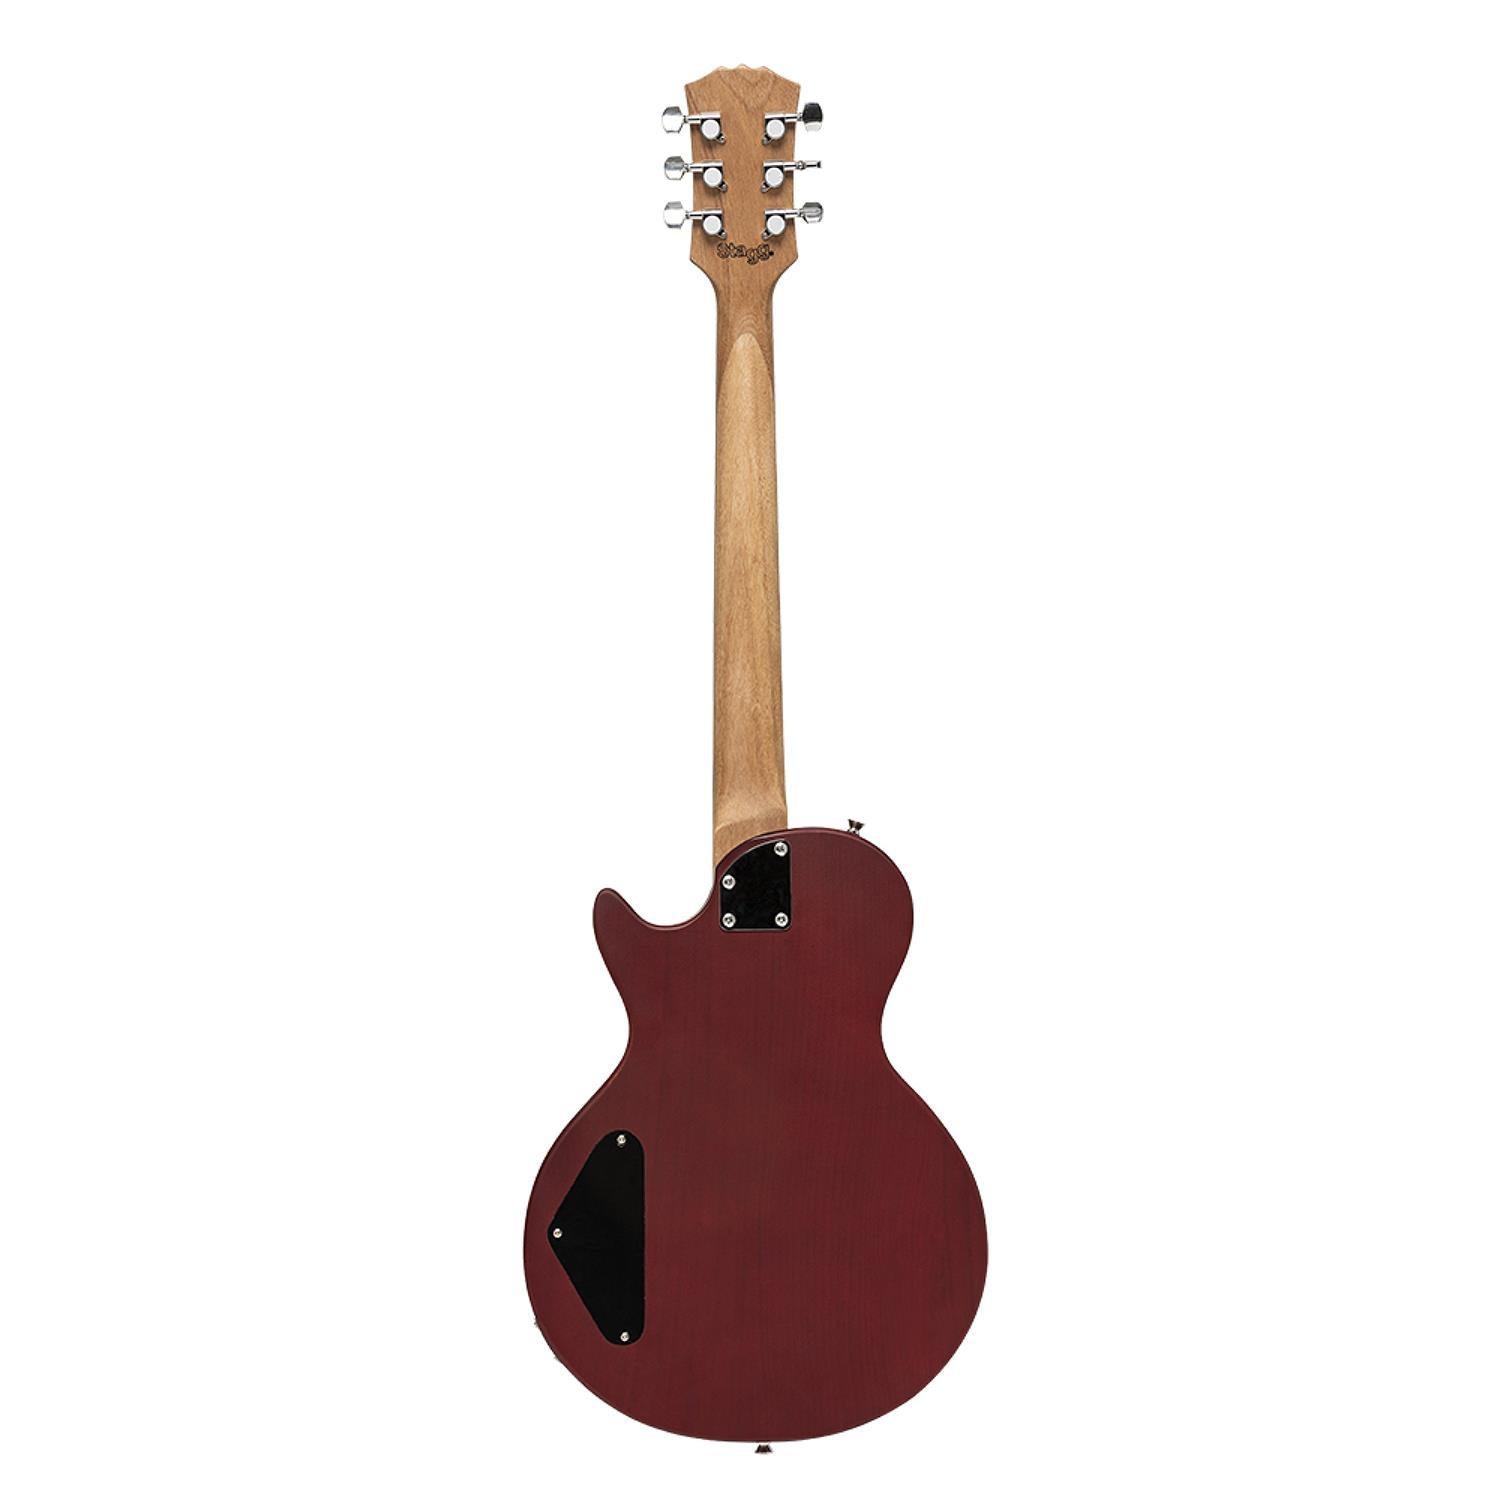 Stagg SSEL-HB90 CHERRY Standard Mahogany Electric Guitar - DY Pro Audio